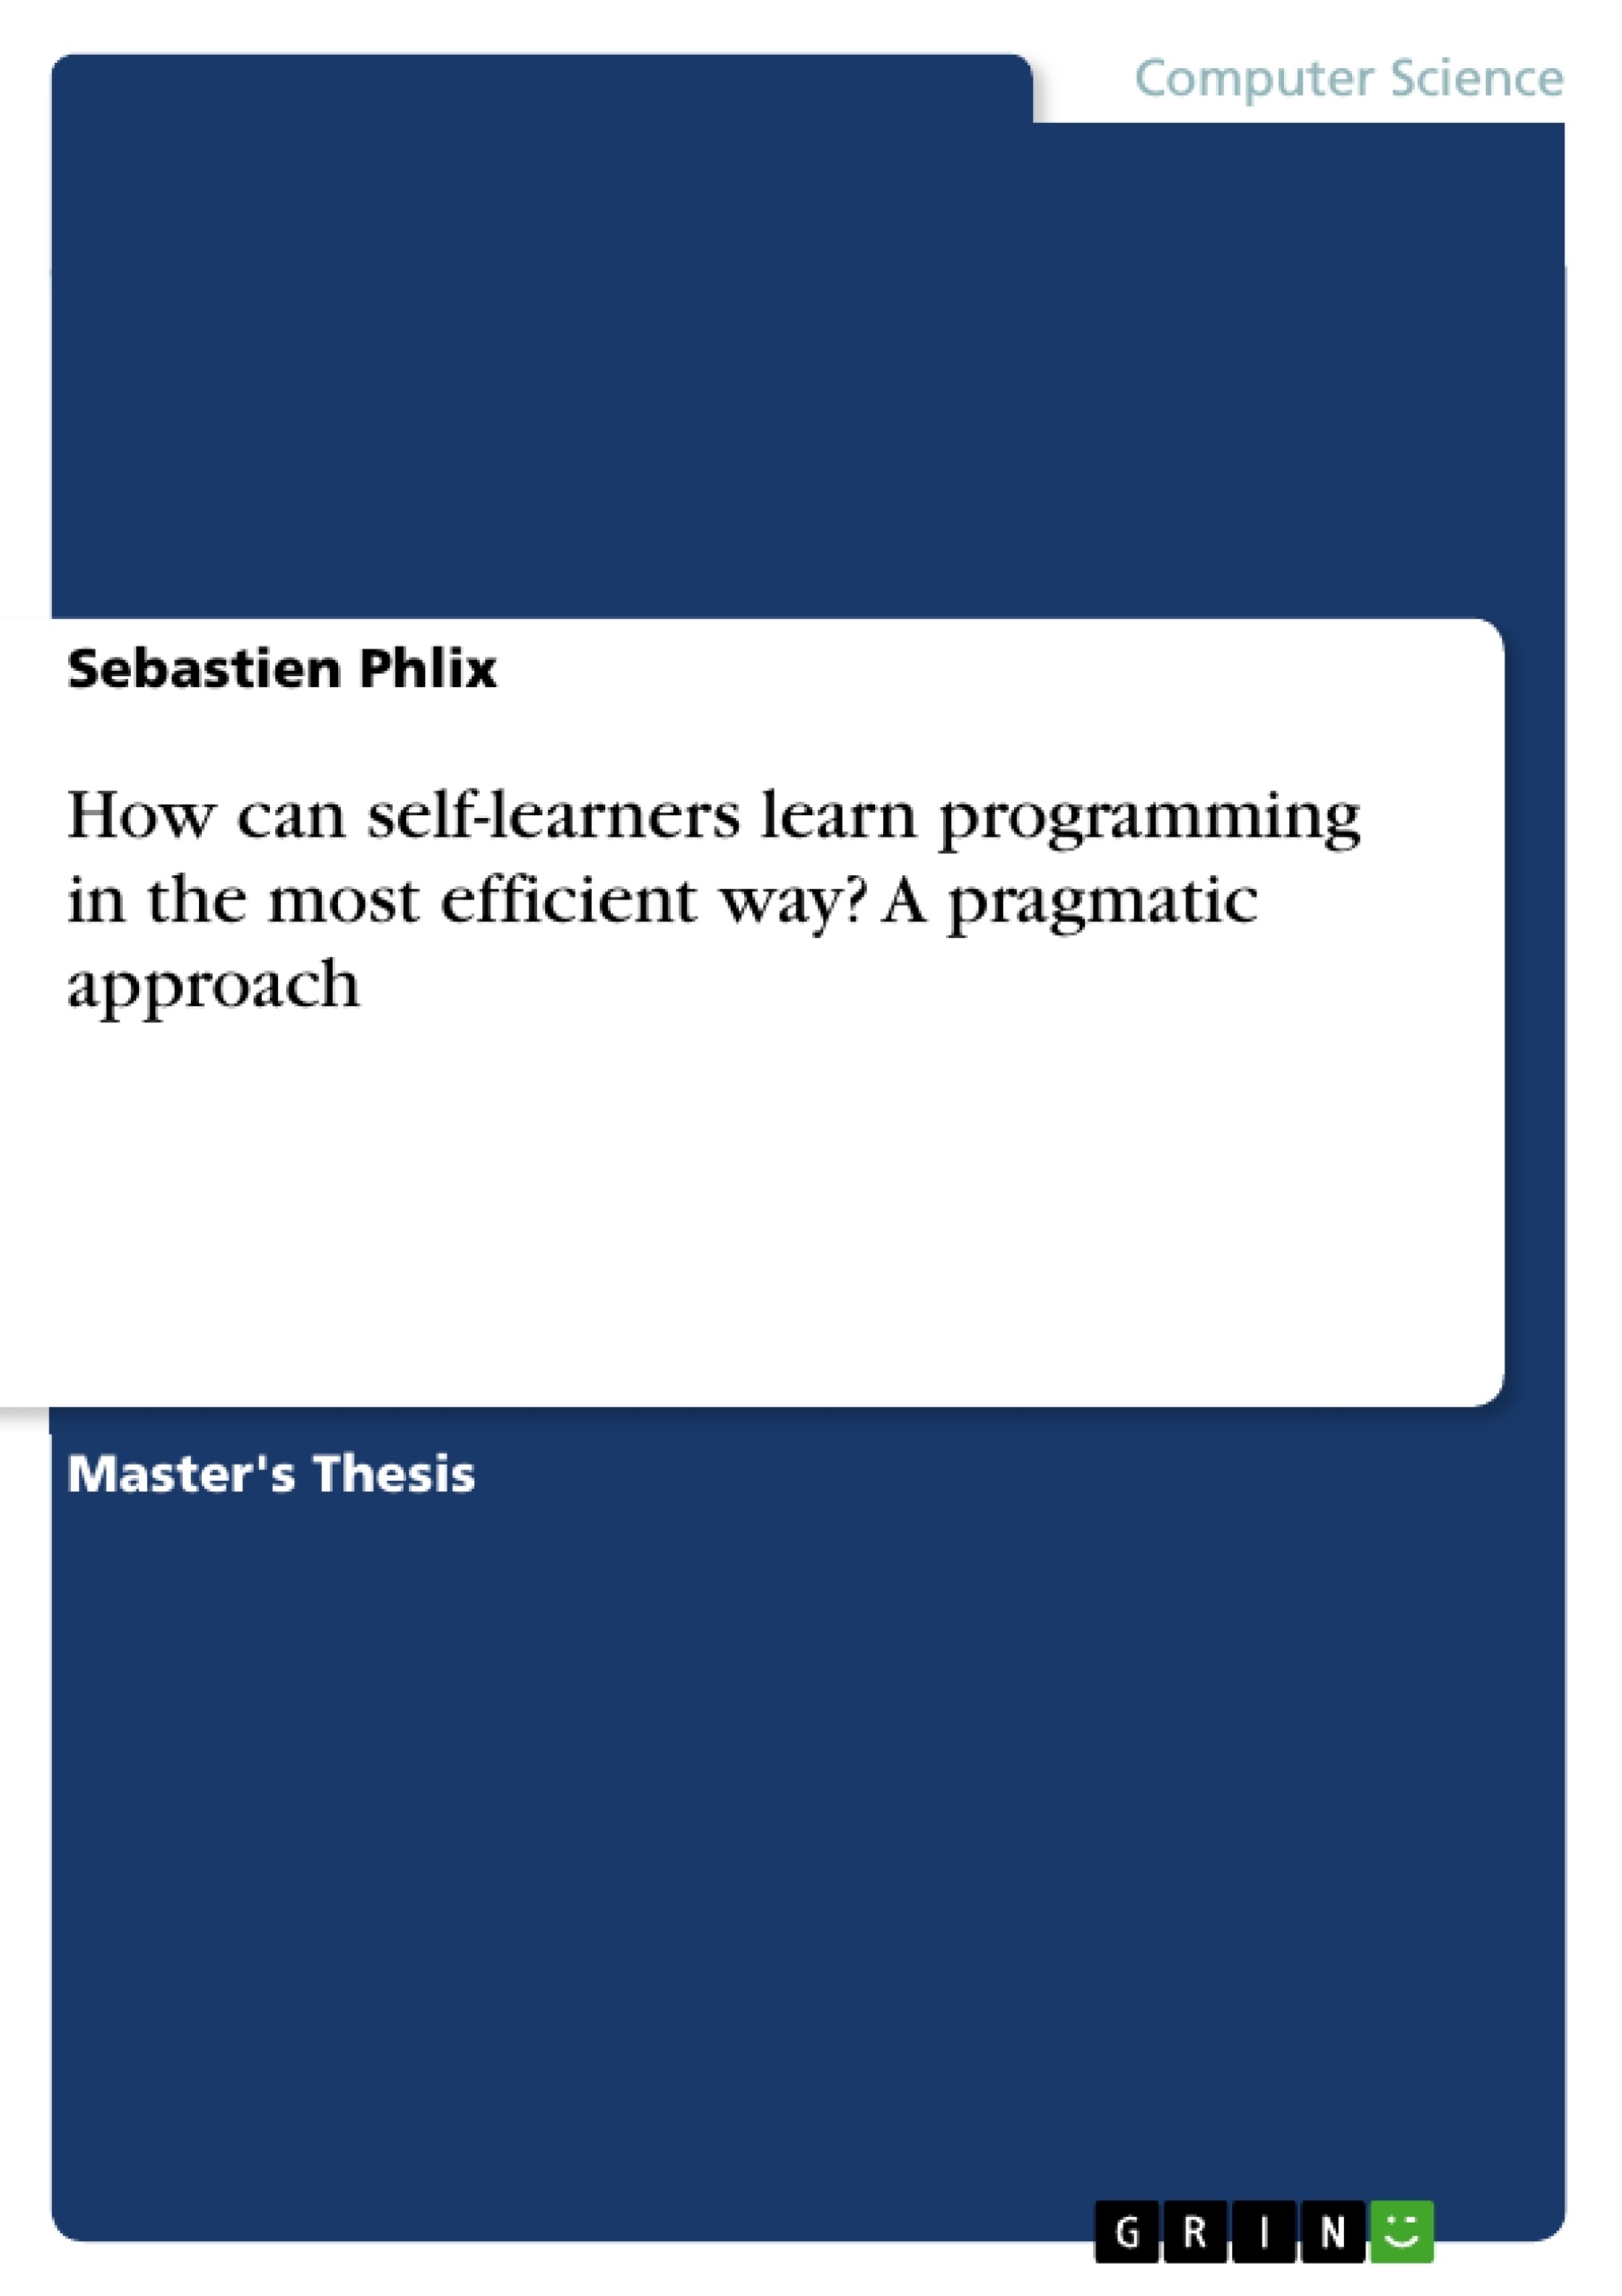 Title: How can self-learners learn programming in the most efficient way? A pragmatic approach